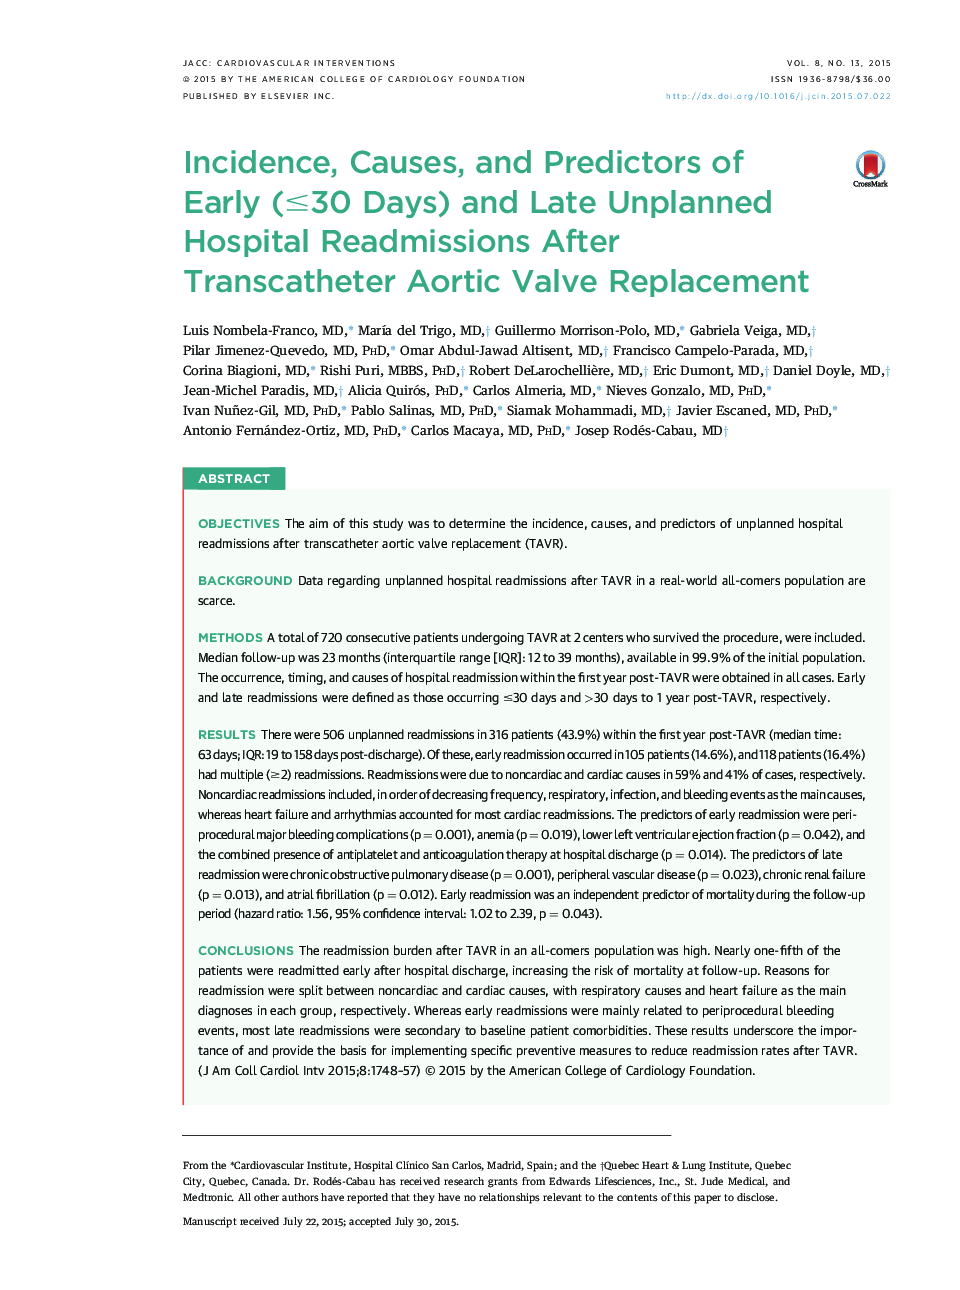 Incidence, Causes, and Predictors of Early (≤30 Days) and Late Unplanned Hospital Readmissions After Transcatheter Aortic Valve Replacement 